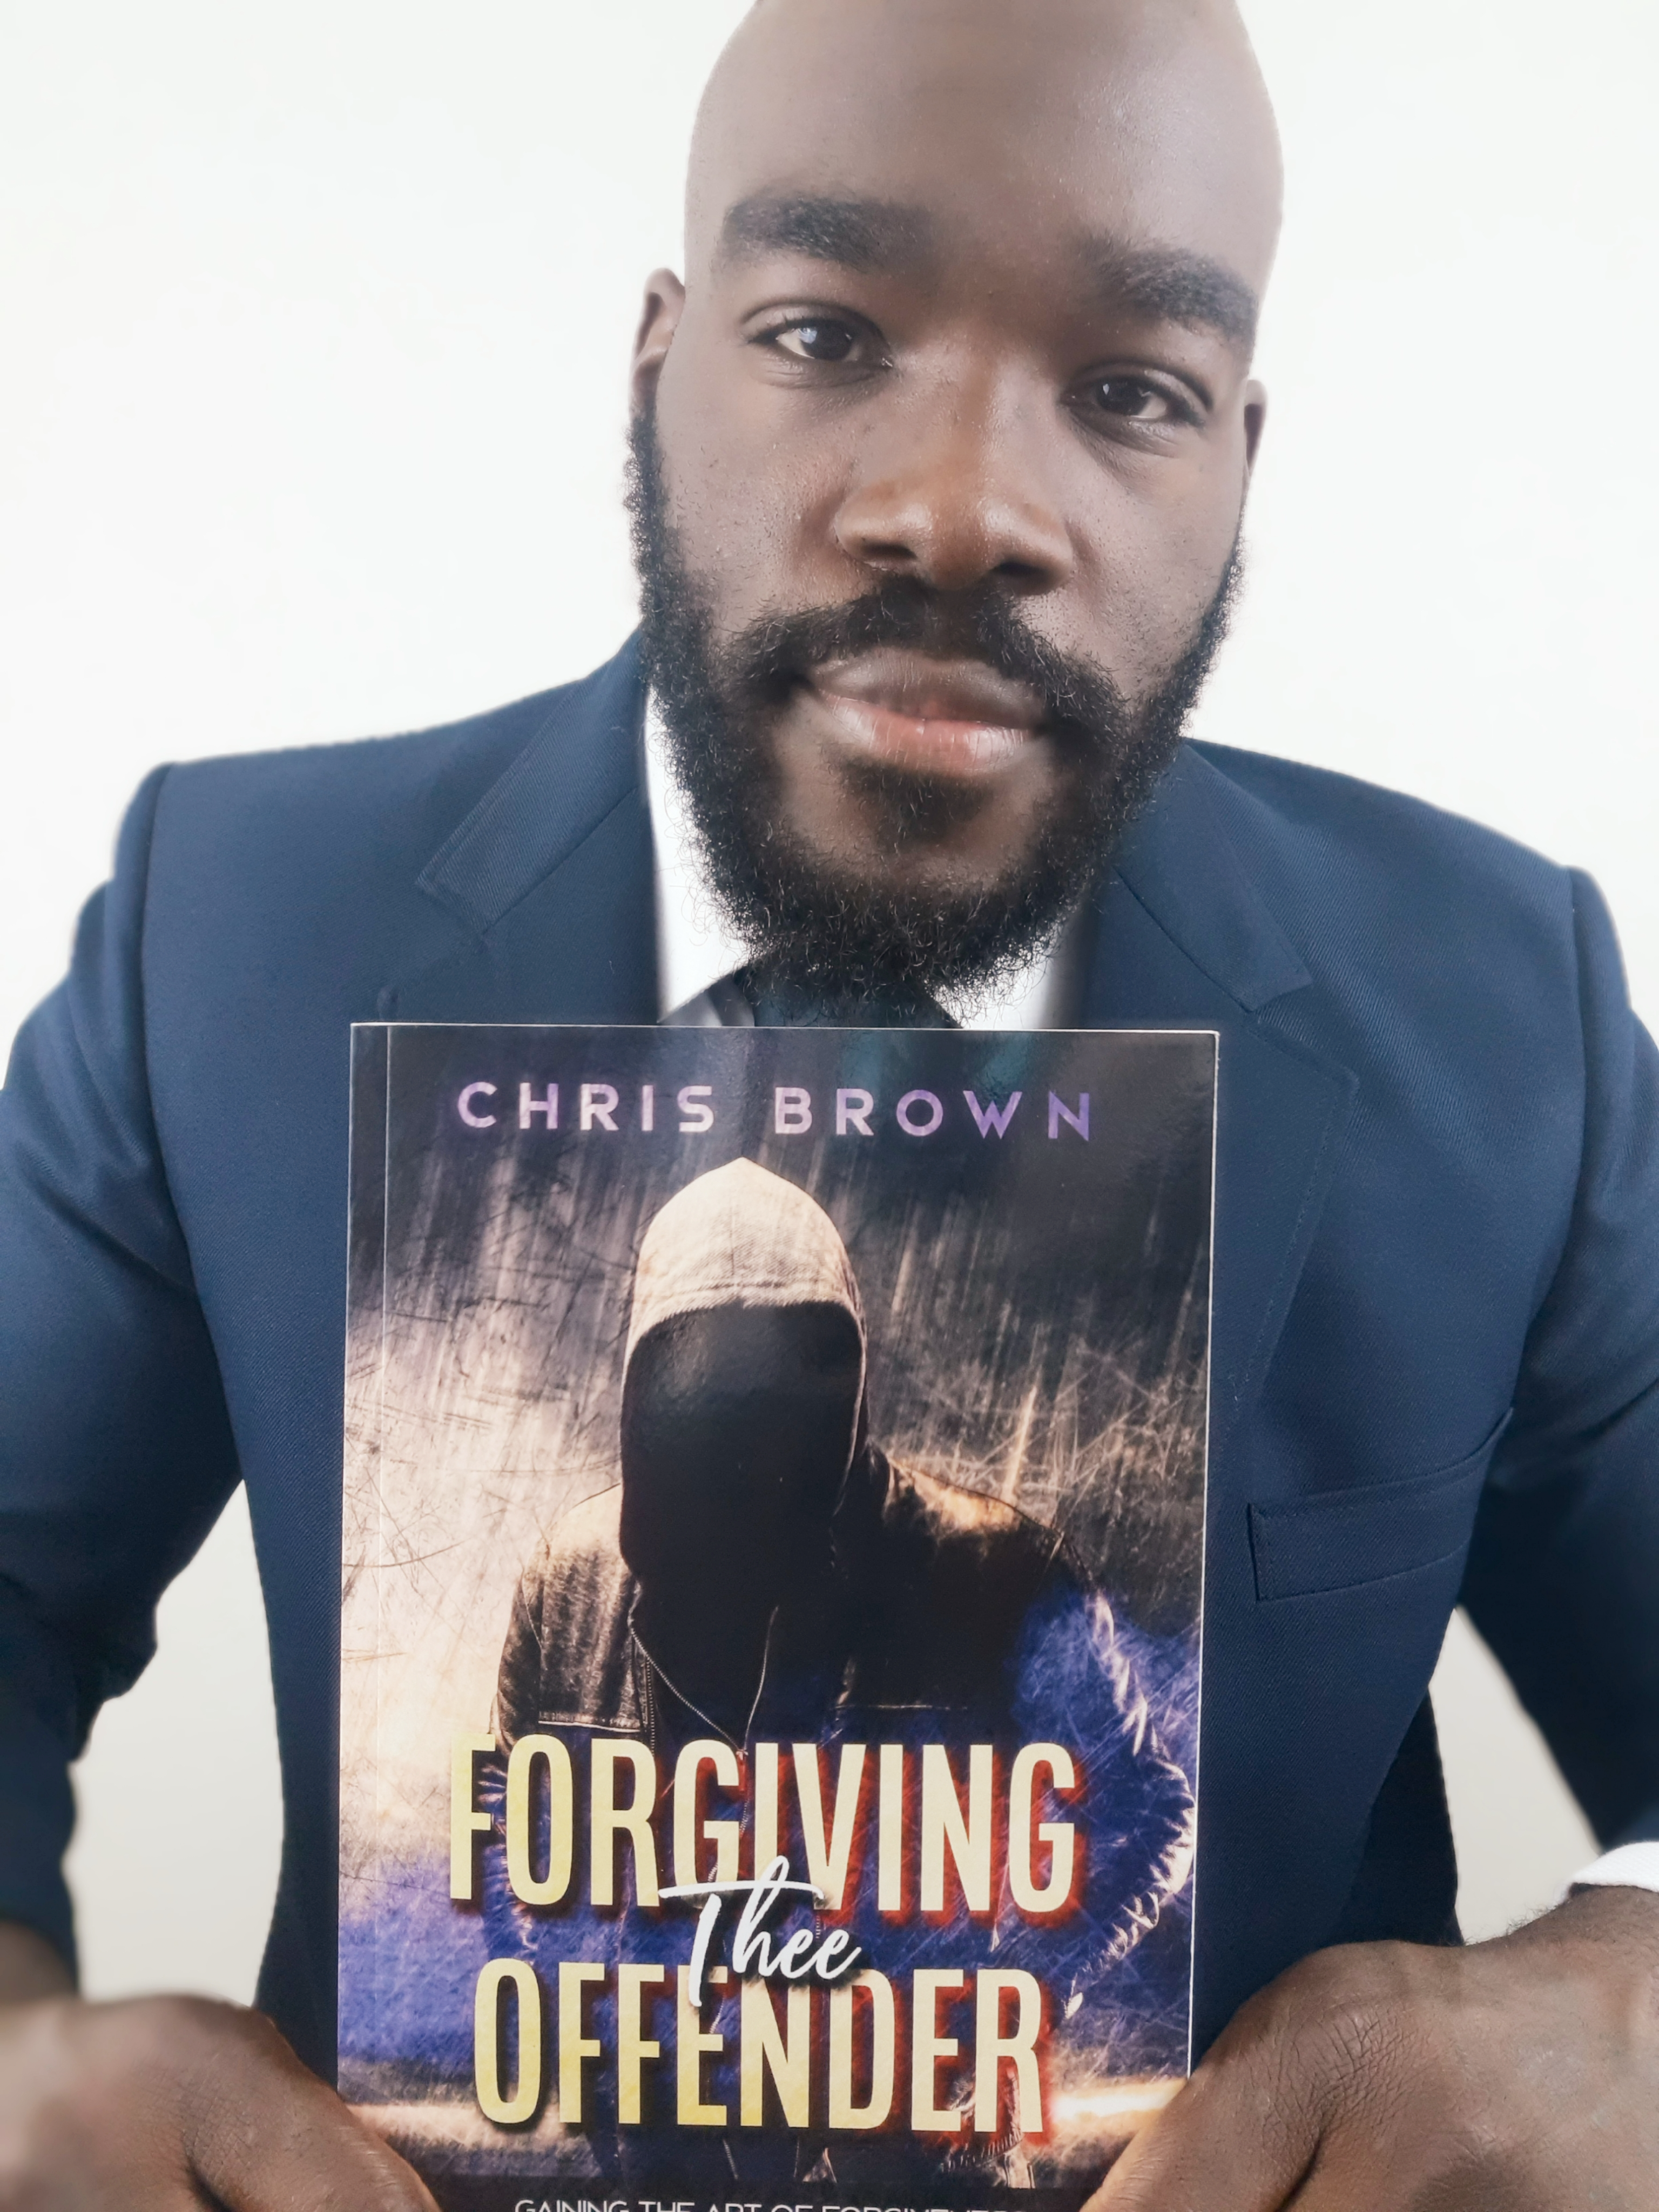 Forgiving Thee Offender: Chris Brown’s New Book is Available on Amazon, in Paperback, Kindle/ebook, and Audiobook. 